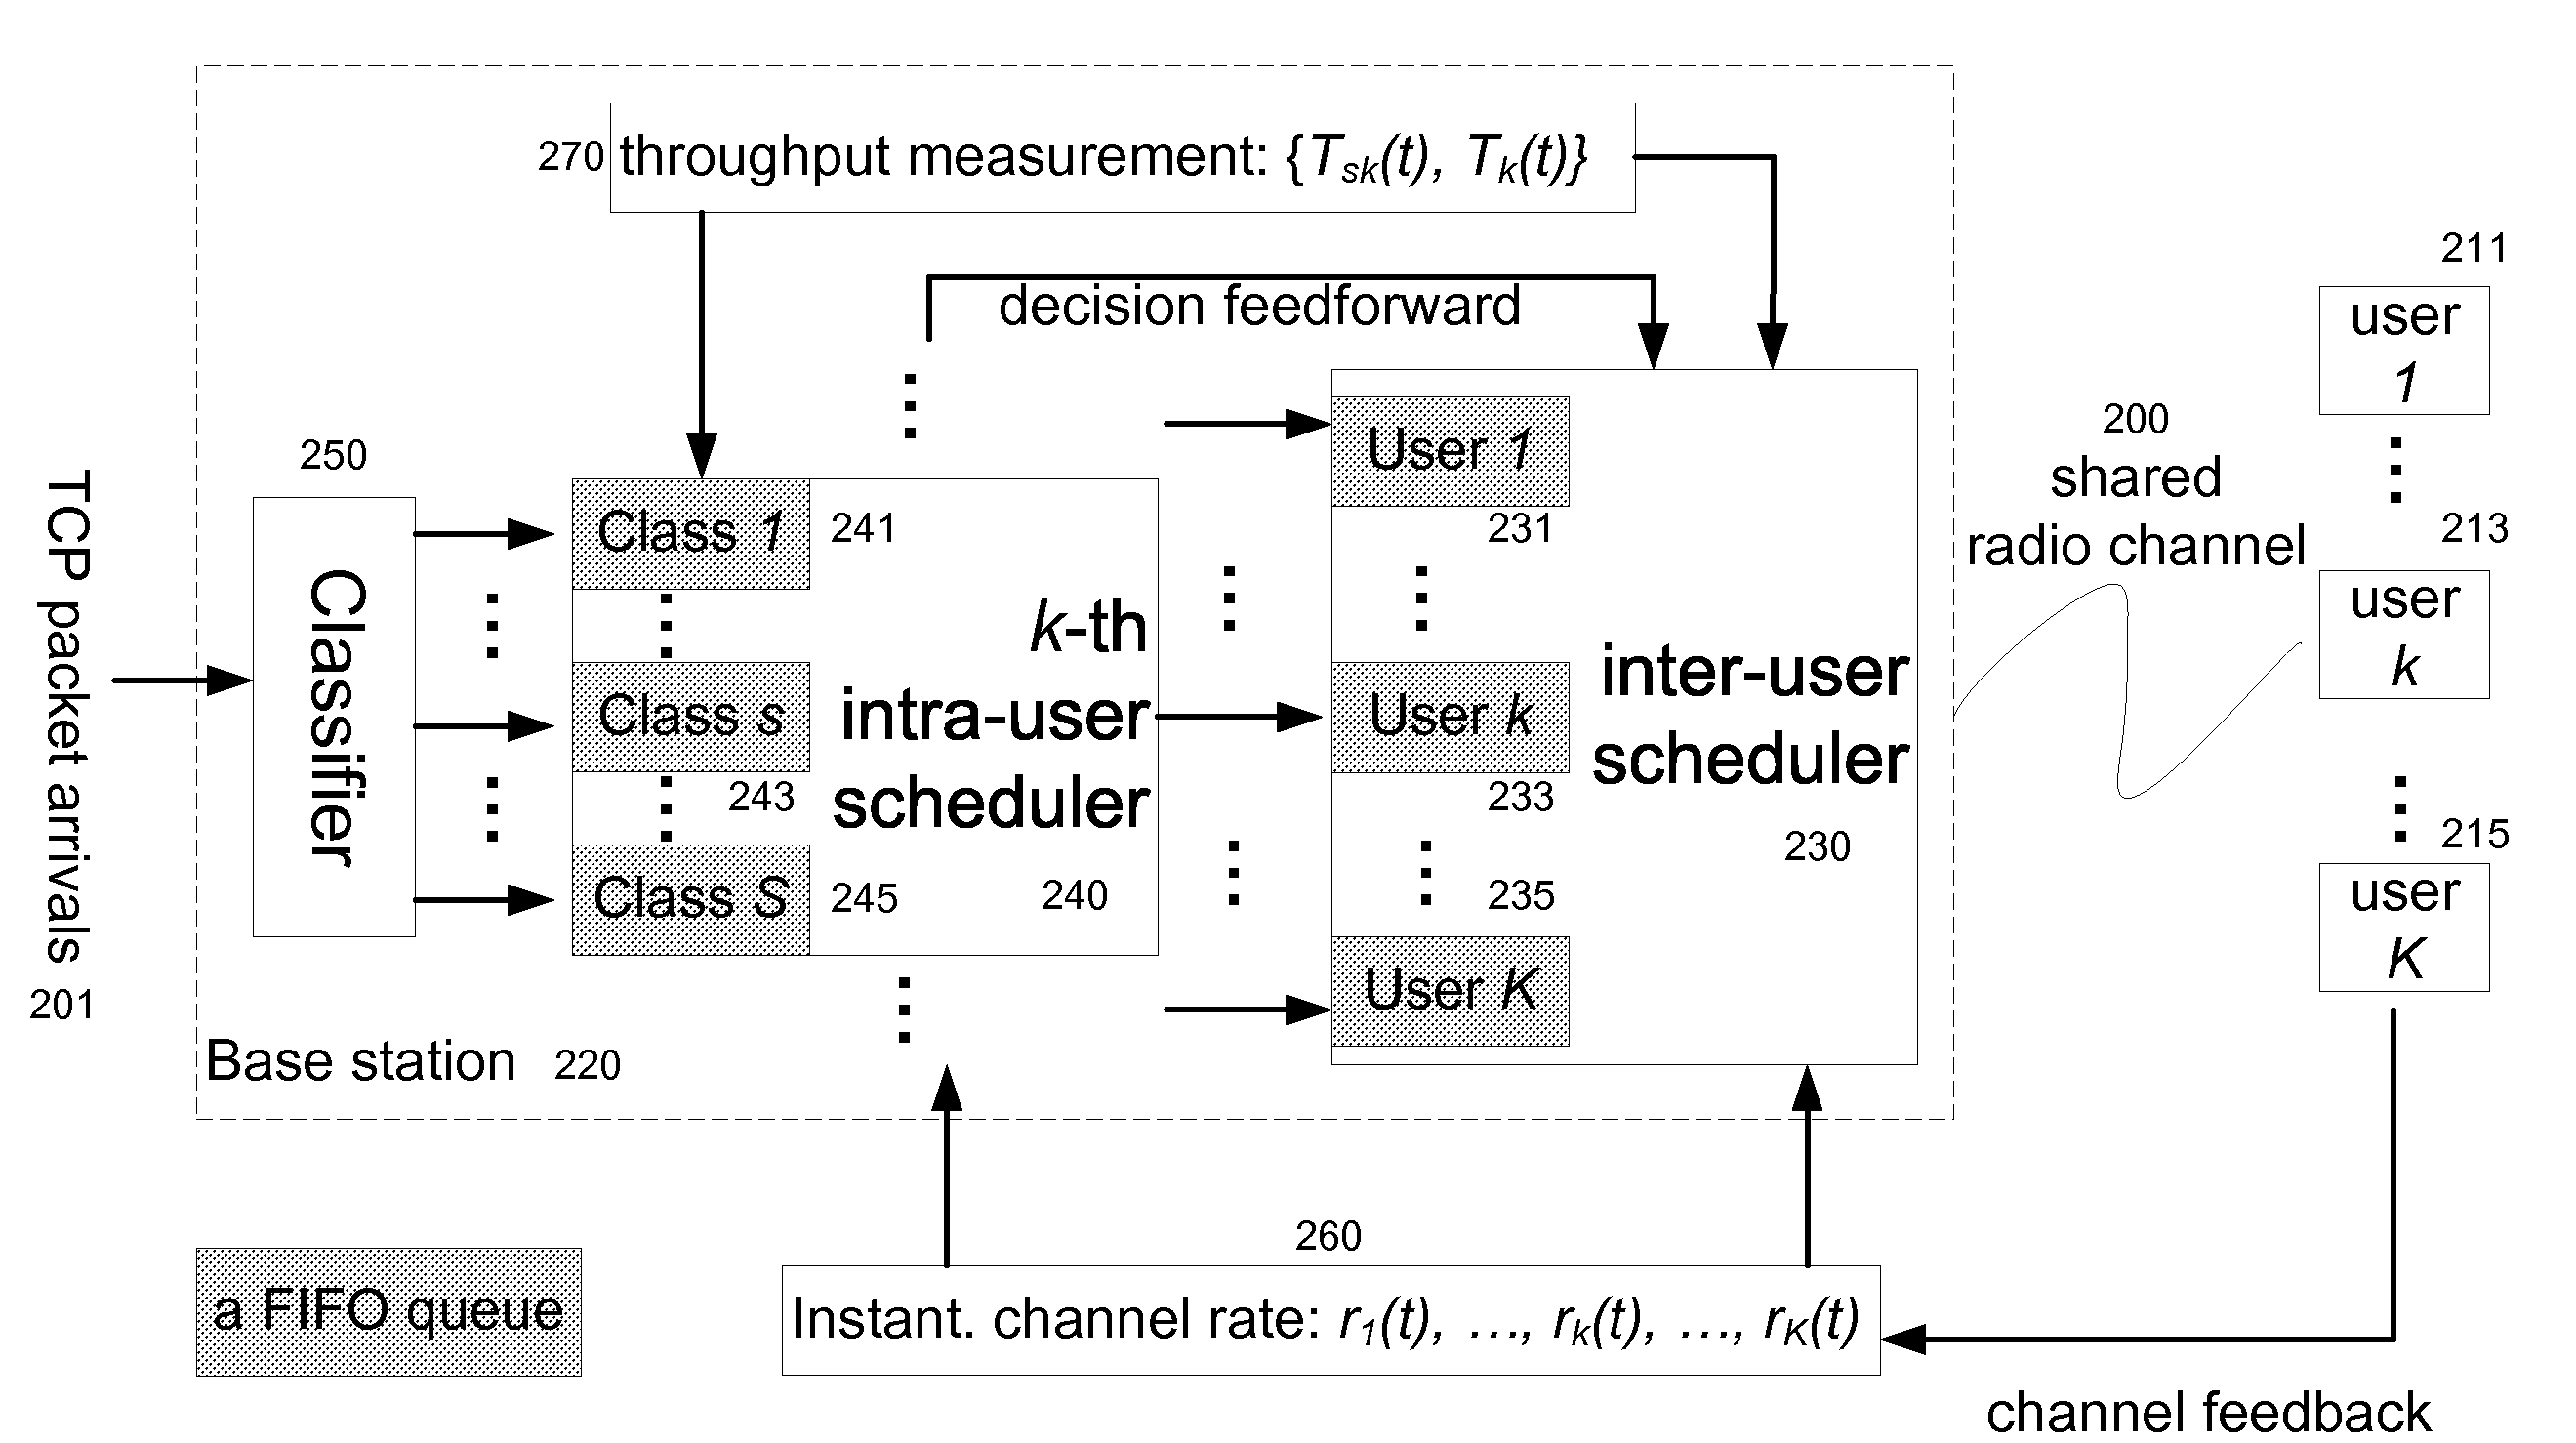 Service Differentiated Downlink Scheduling in Wireless Packet Data Systems